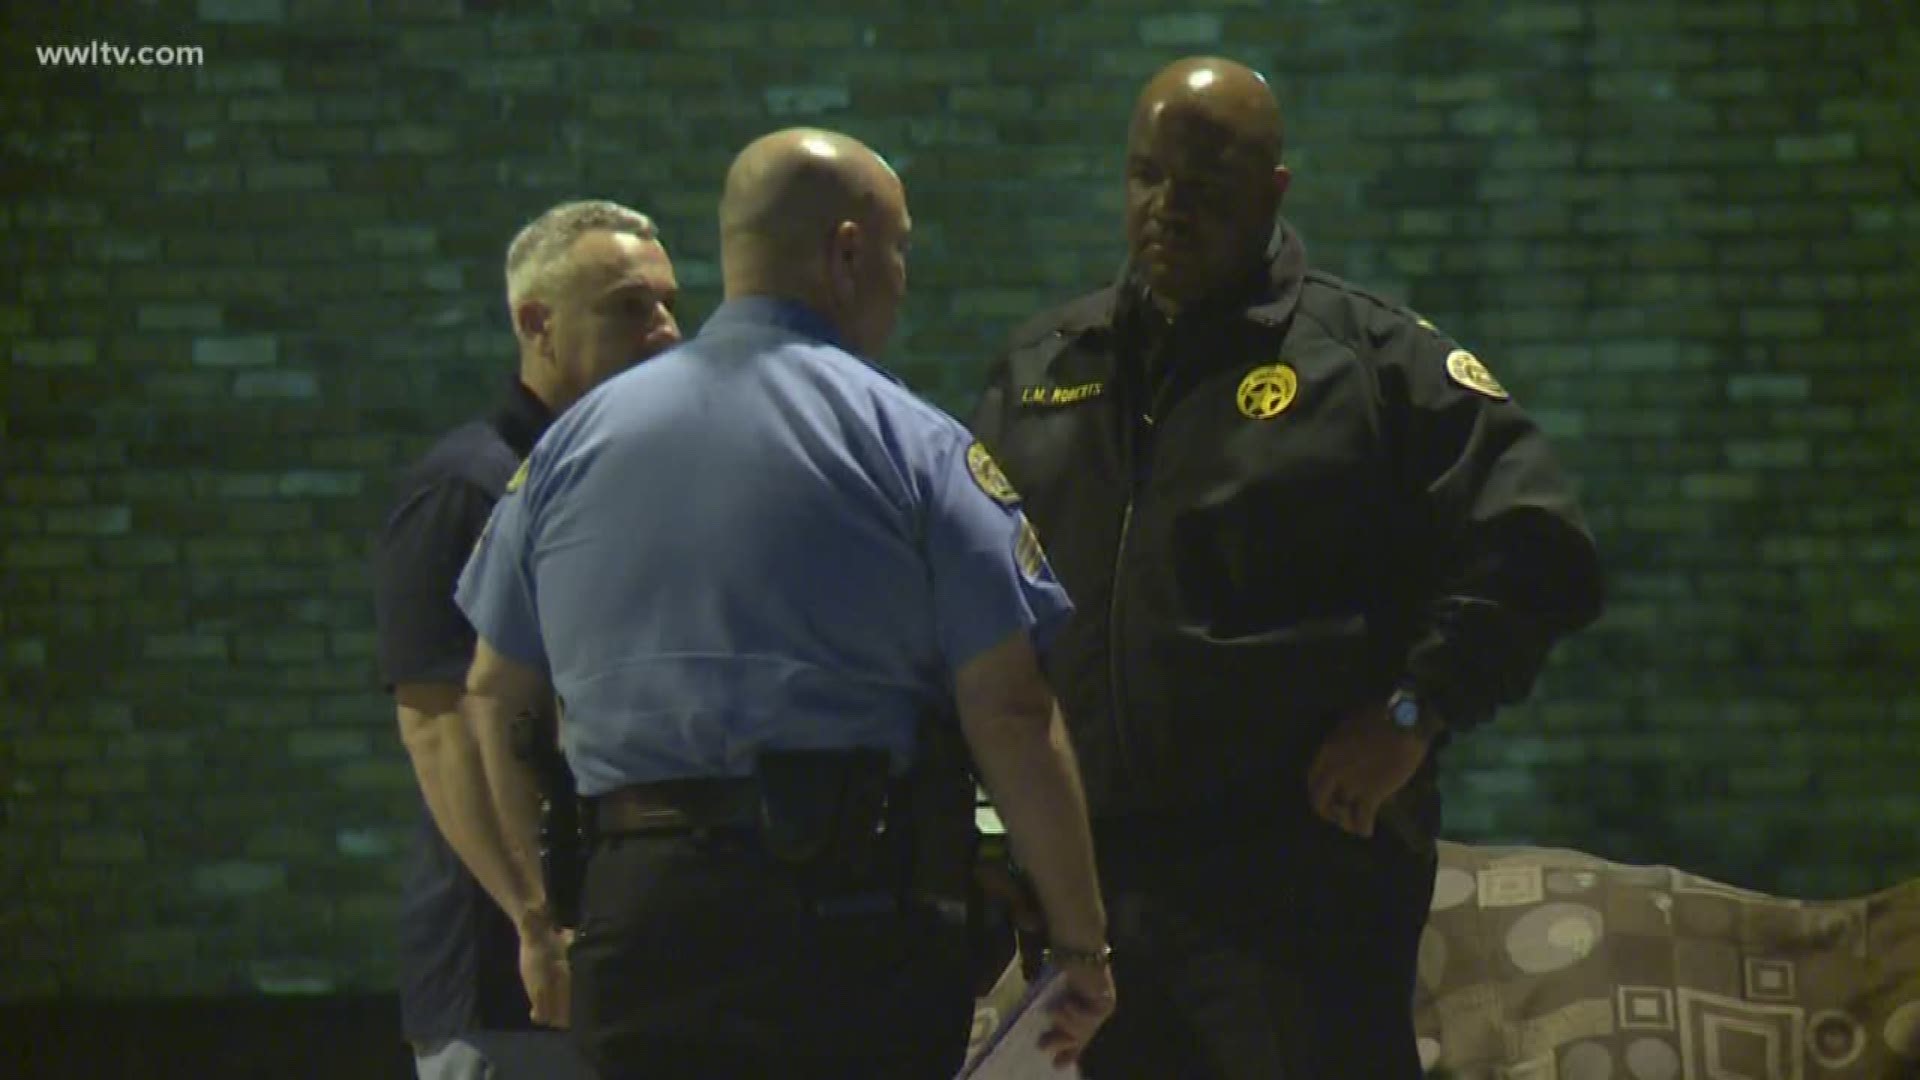 It's the second shooting in the Claiborne/I-10 Underpass area in two weekends.